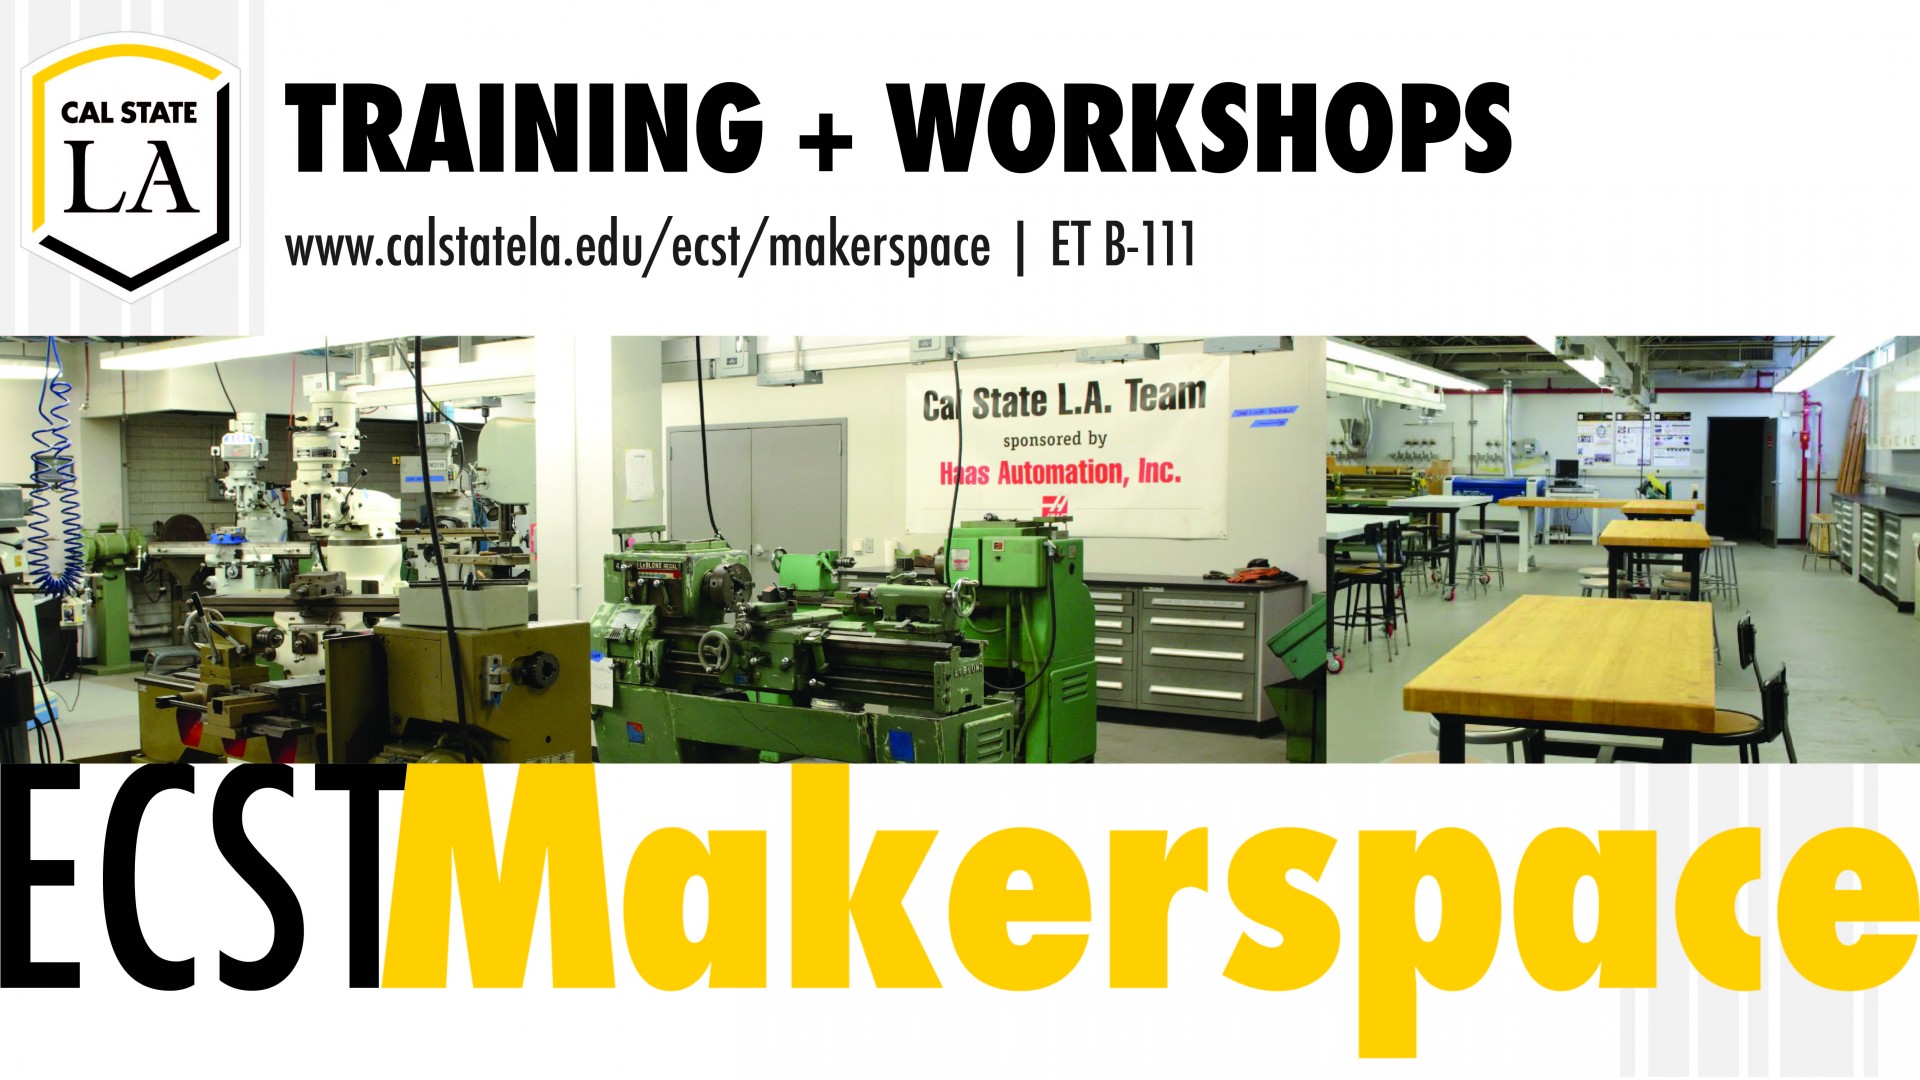 ECST Makerspace Training and Workshops at ET B-111